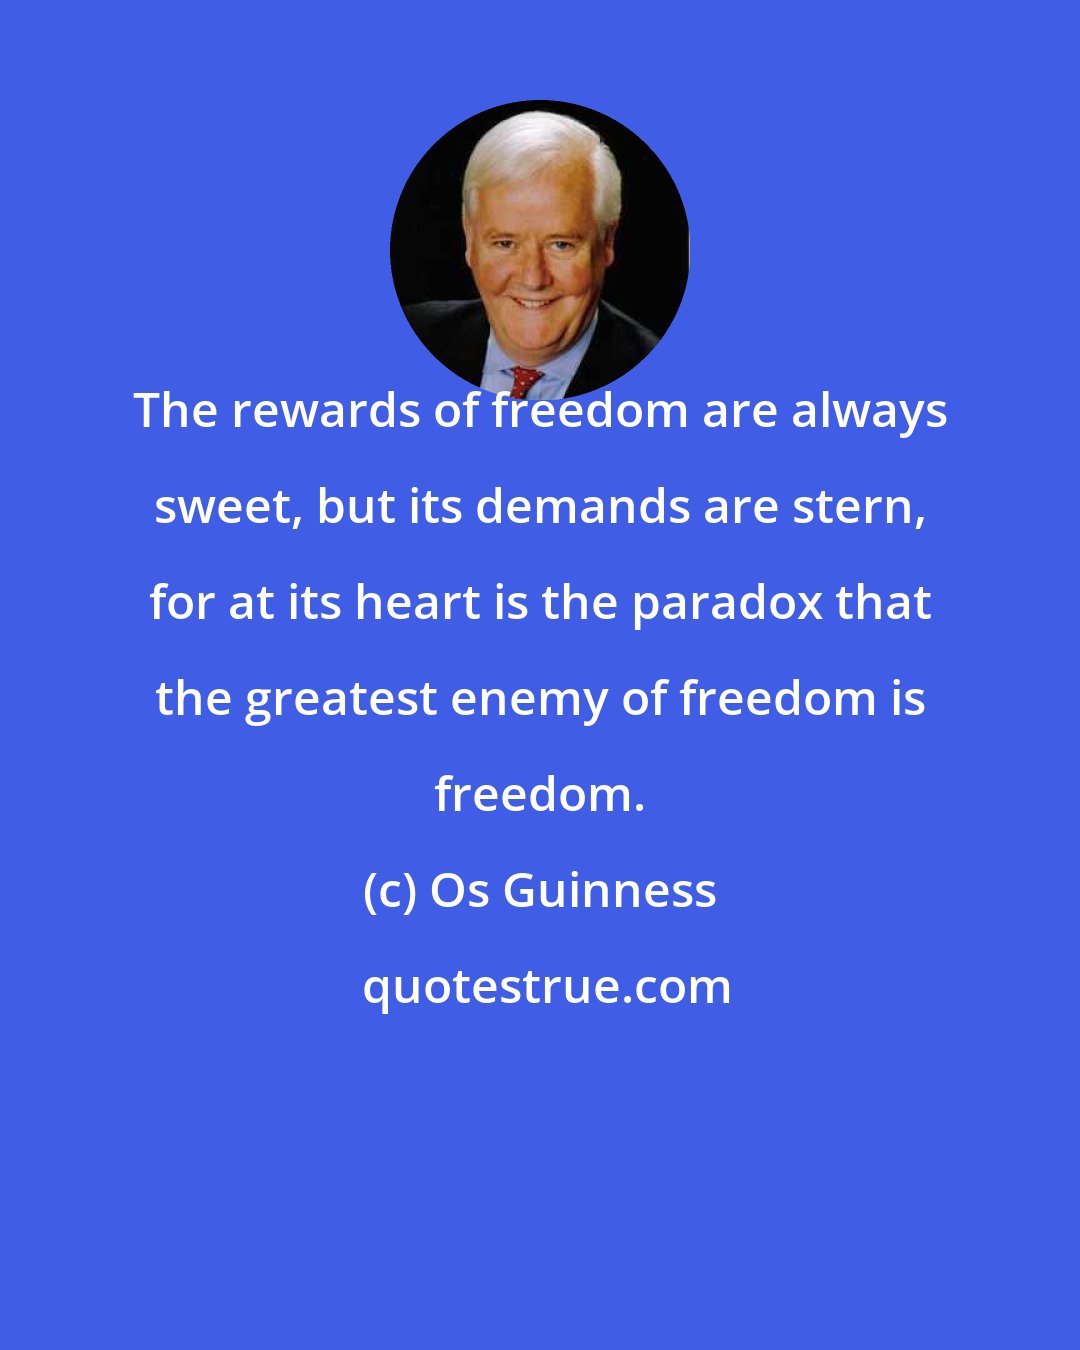 Os Guinness: The rewards of freedom are always sweet, but its demands are stern, for at its heart is the paradox that the greatest enemy of freedom is freedom.